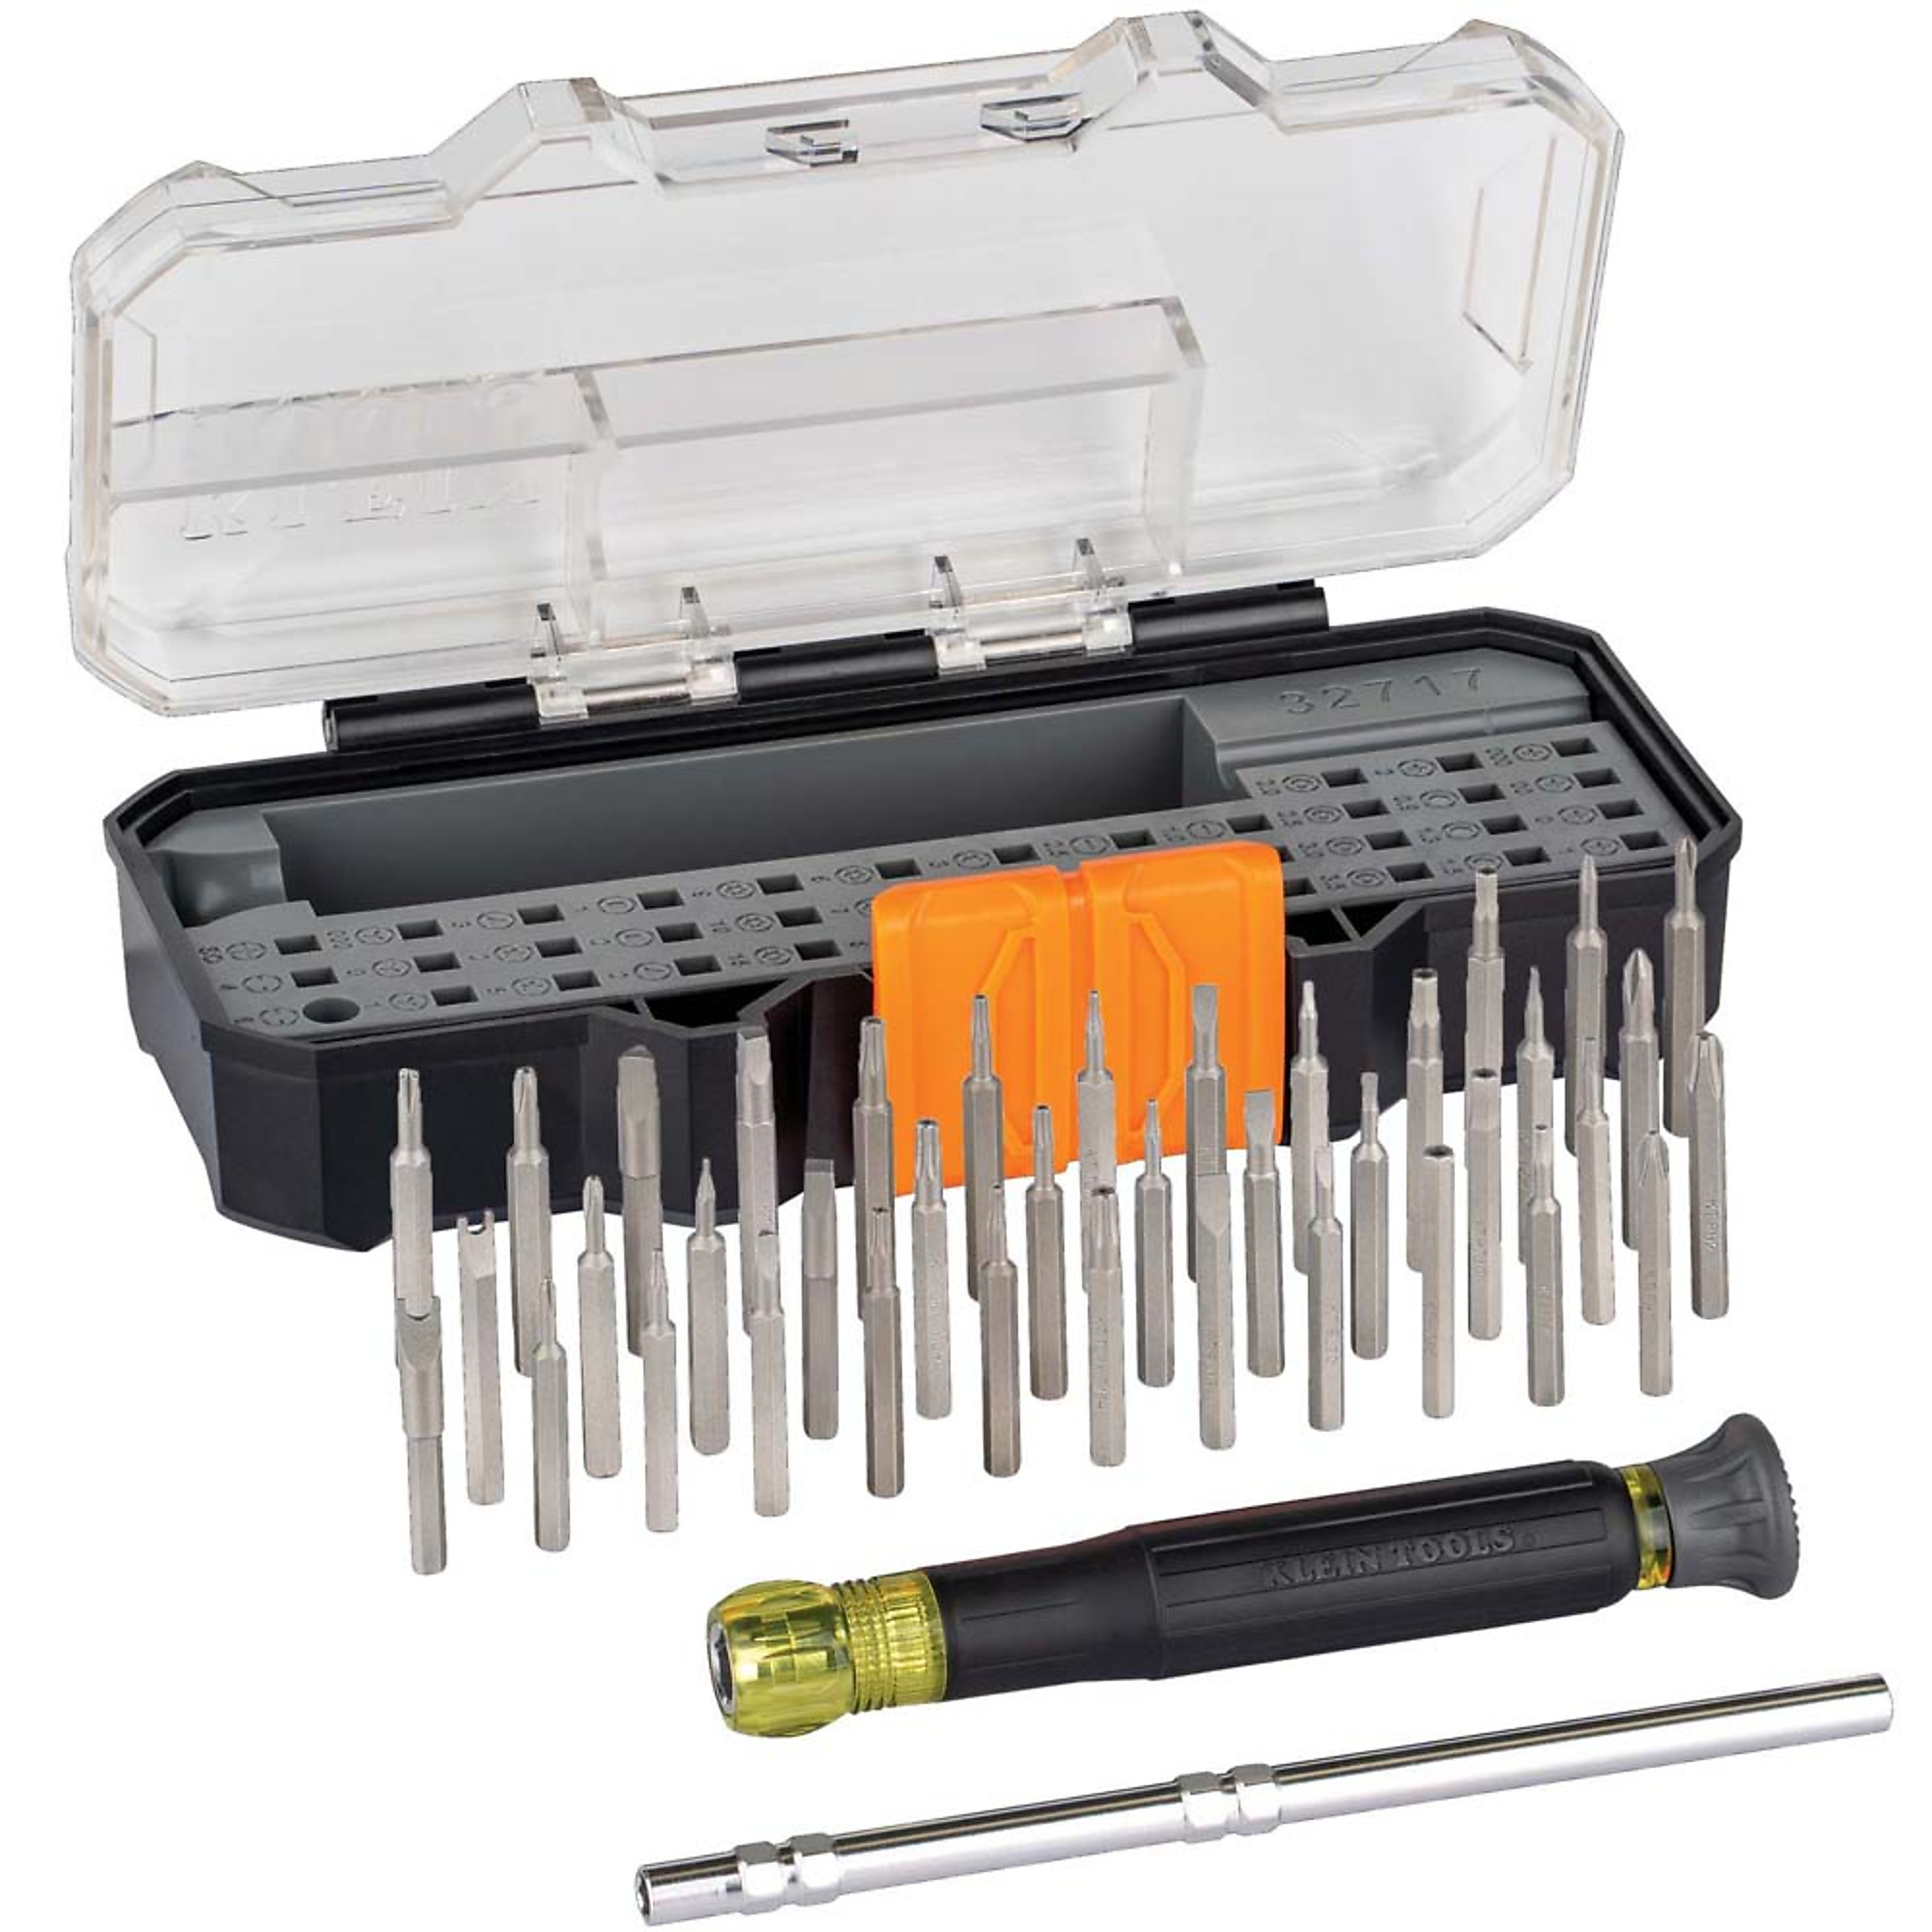 Klein Tools, All-in-1 Precision Screwdriver Set with Case, Drive Type Other, Model 32717